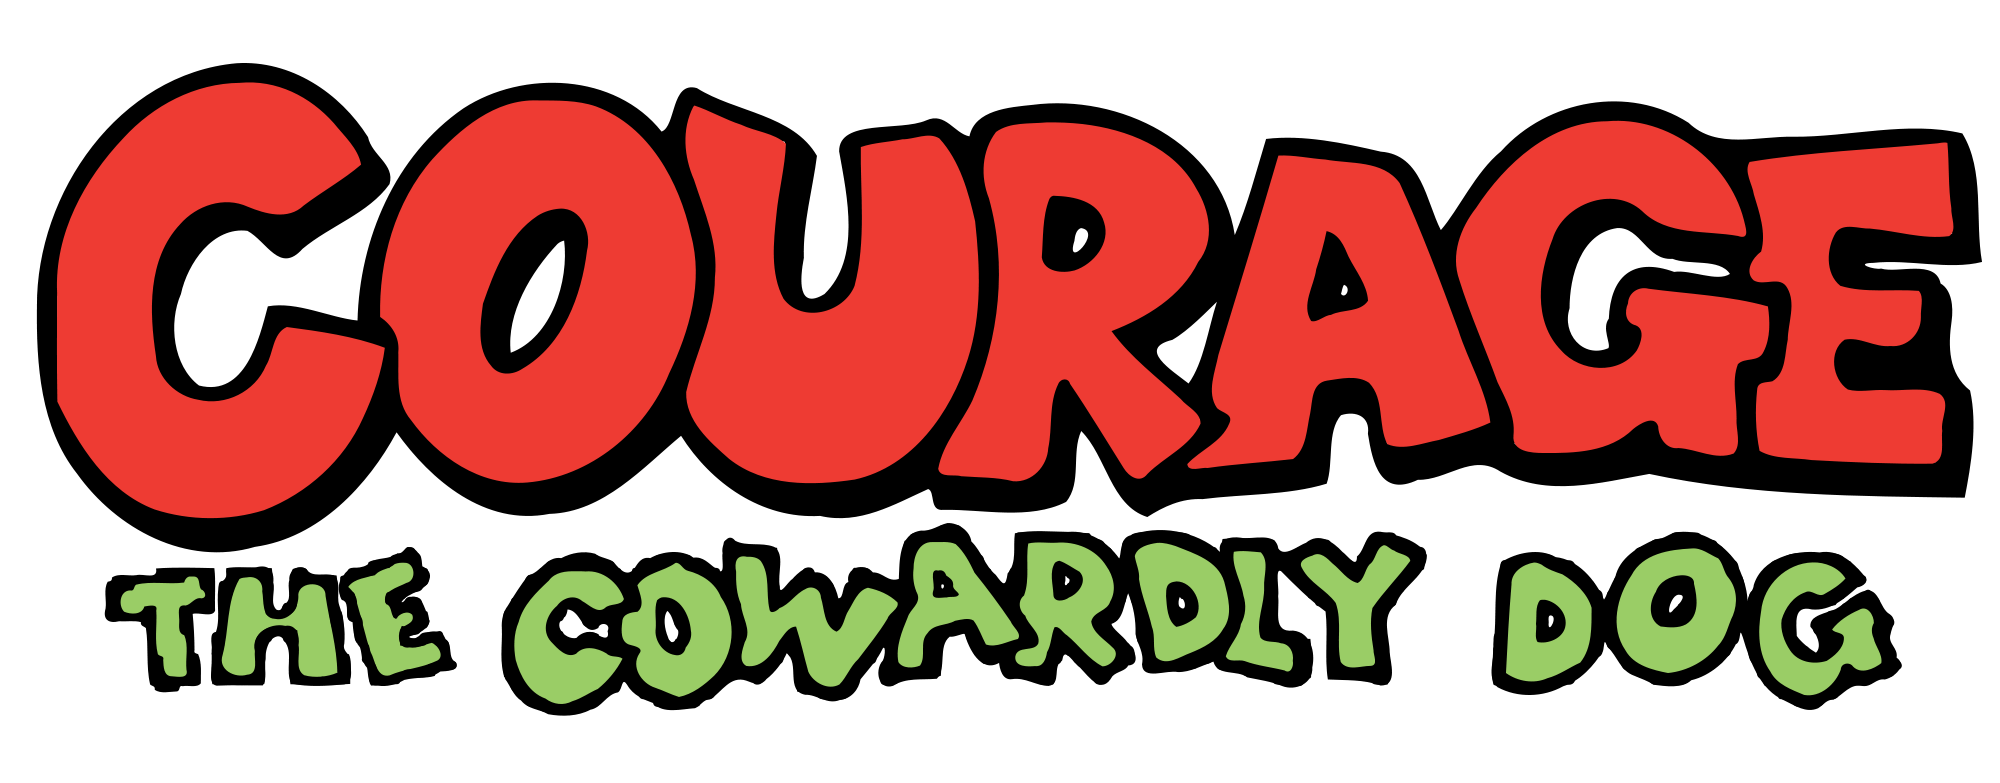 Courage Logo - Courage the Cowardly Dog television series logo.svg